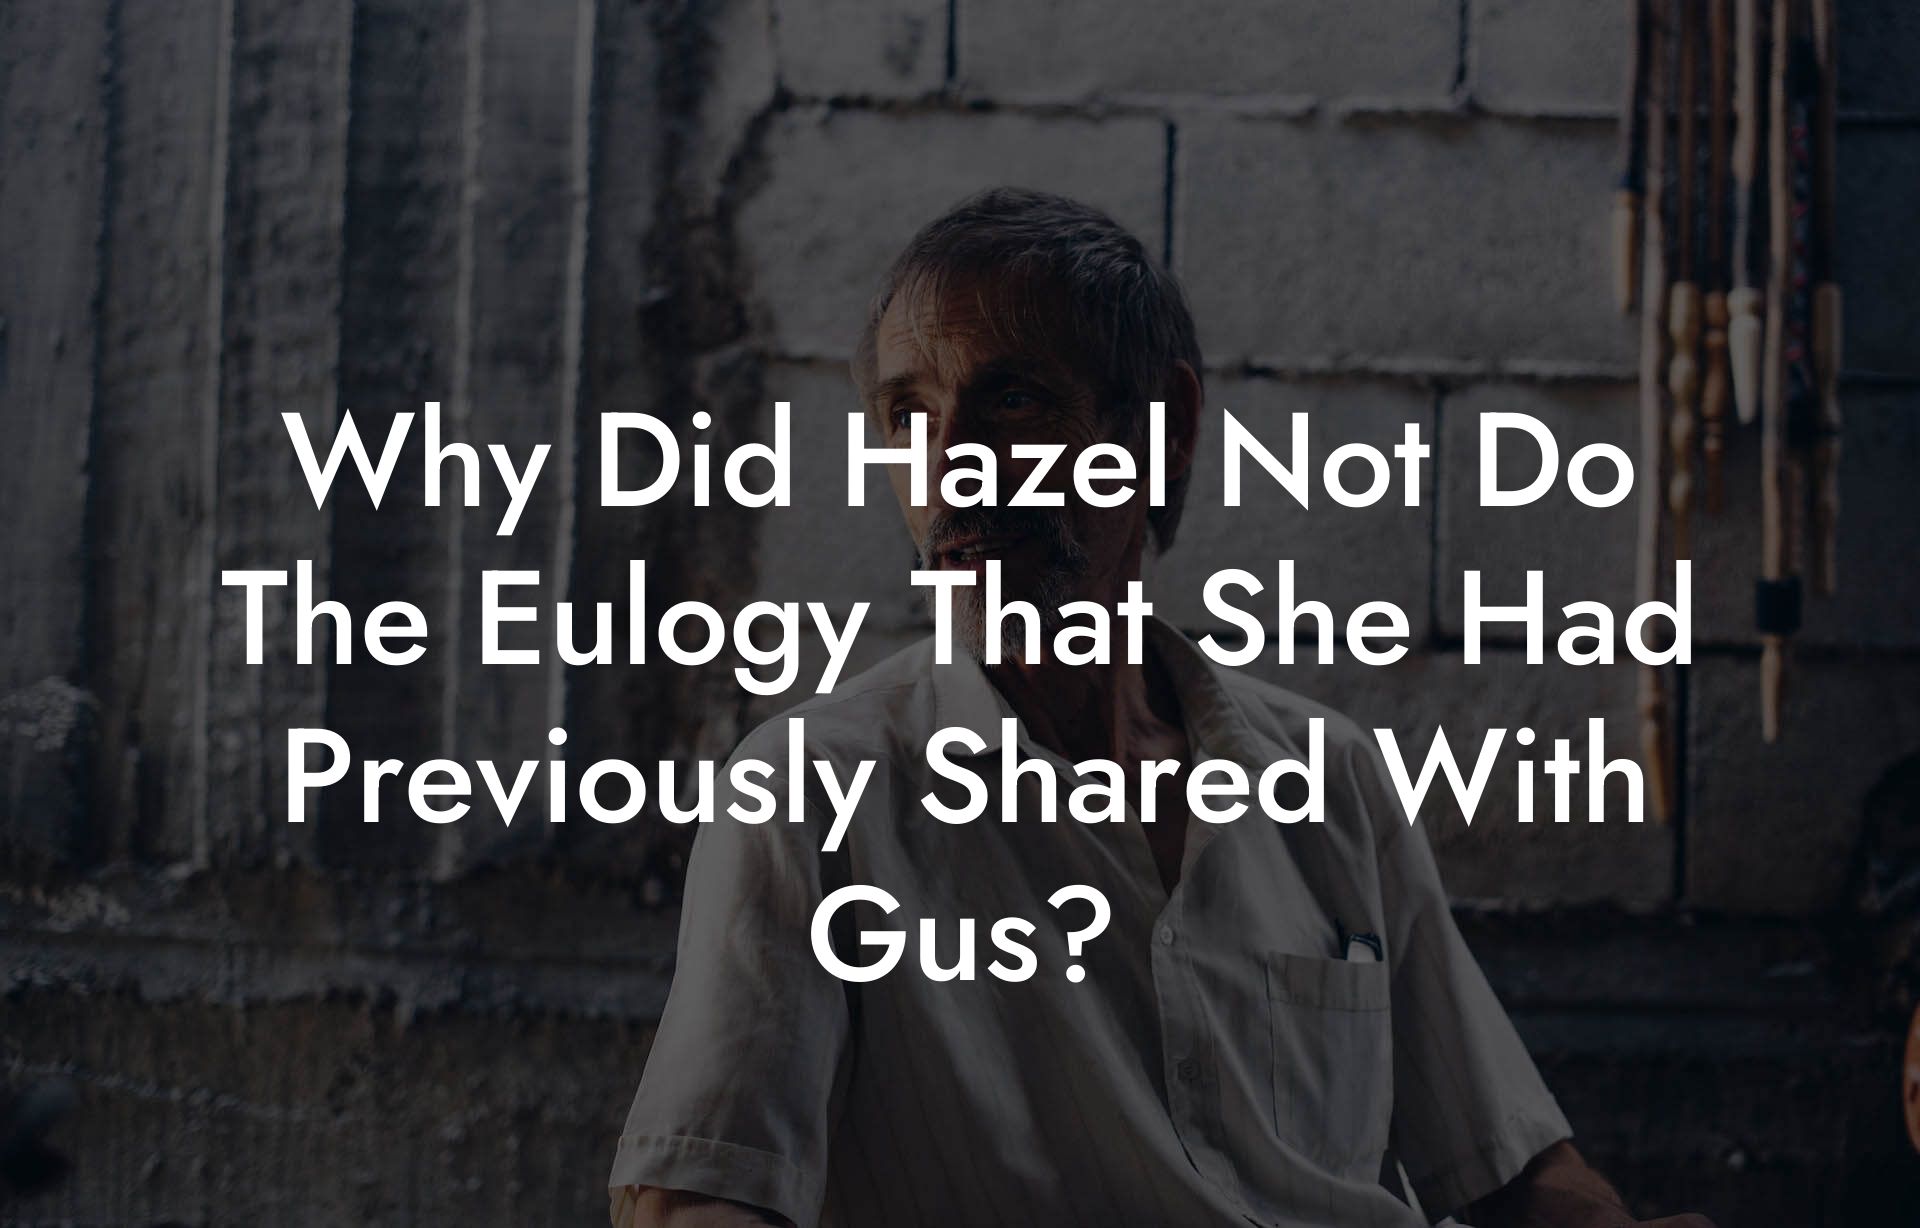 Why Did Hazel Not Do The Eulogy That She Had Previously Shared With Gus?